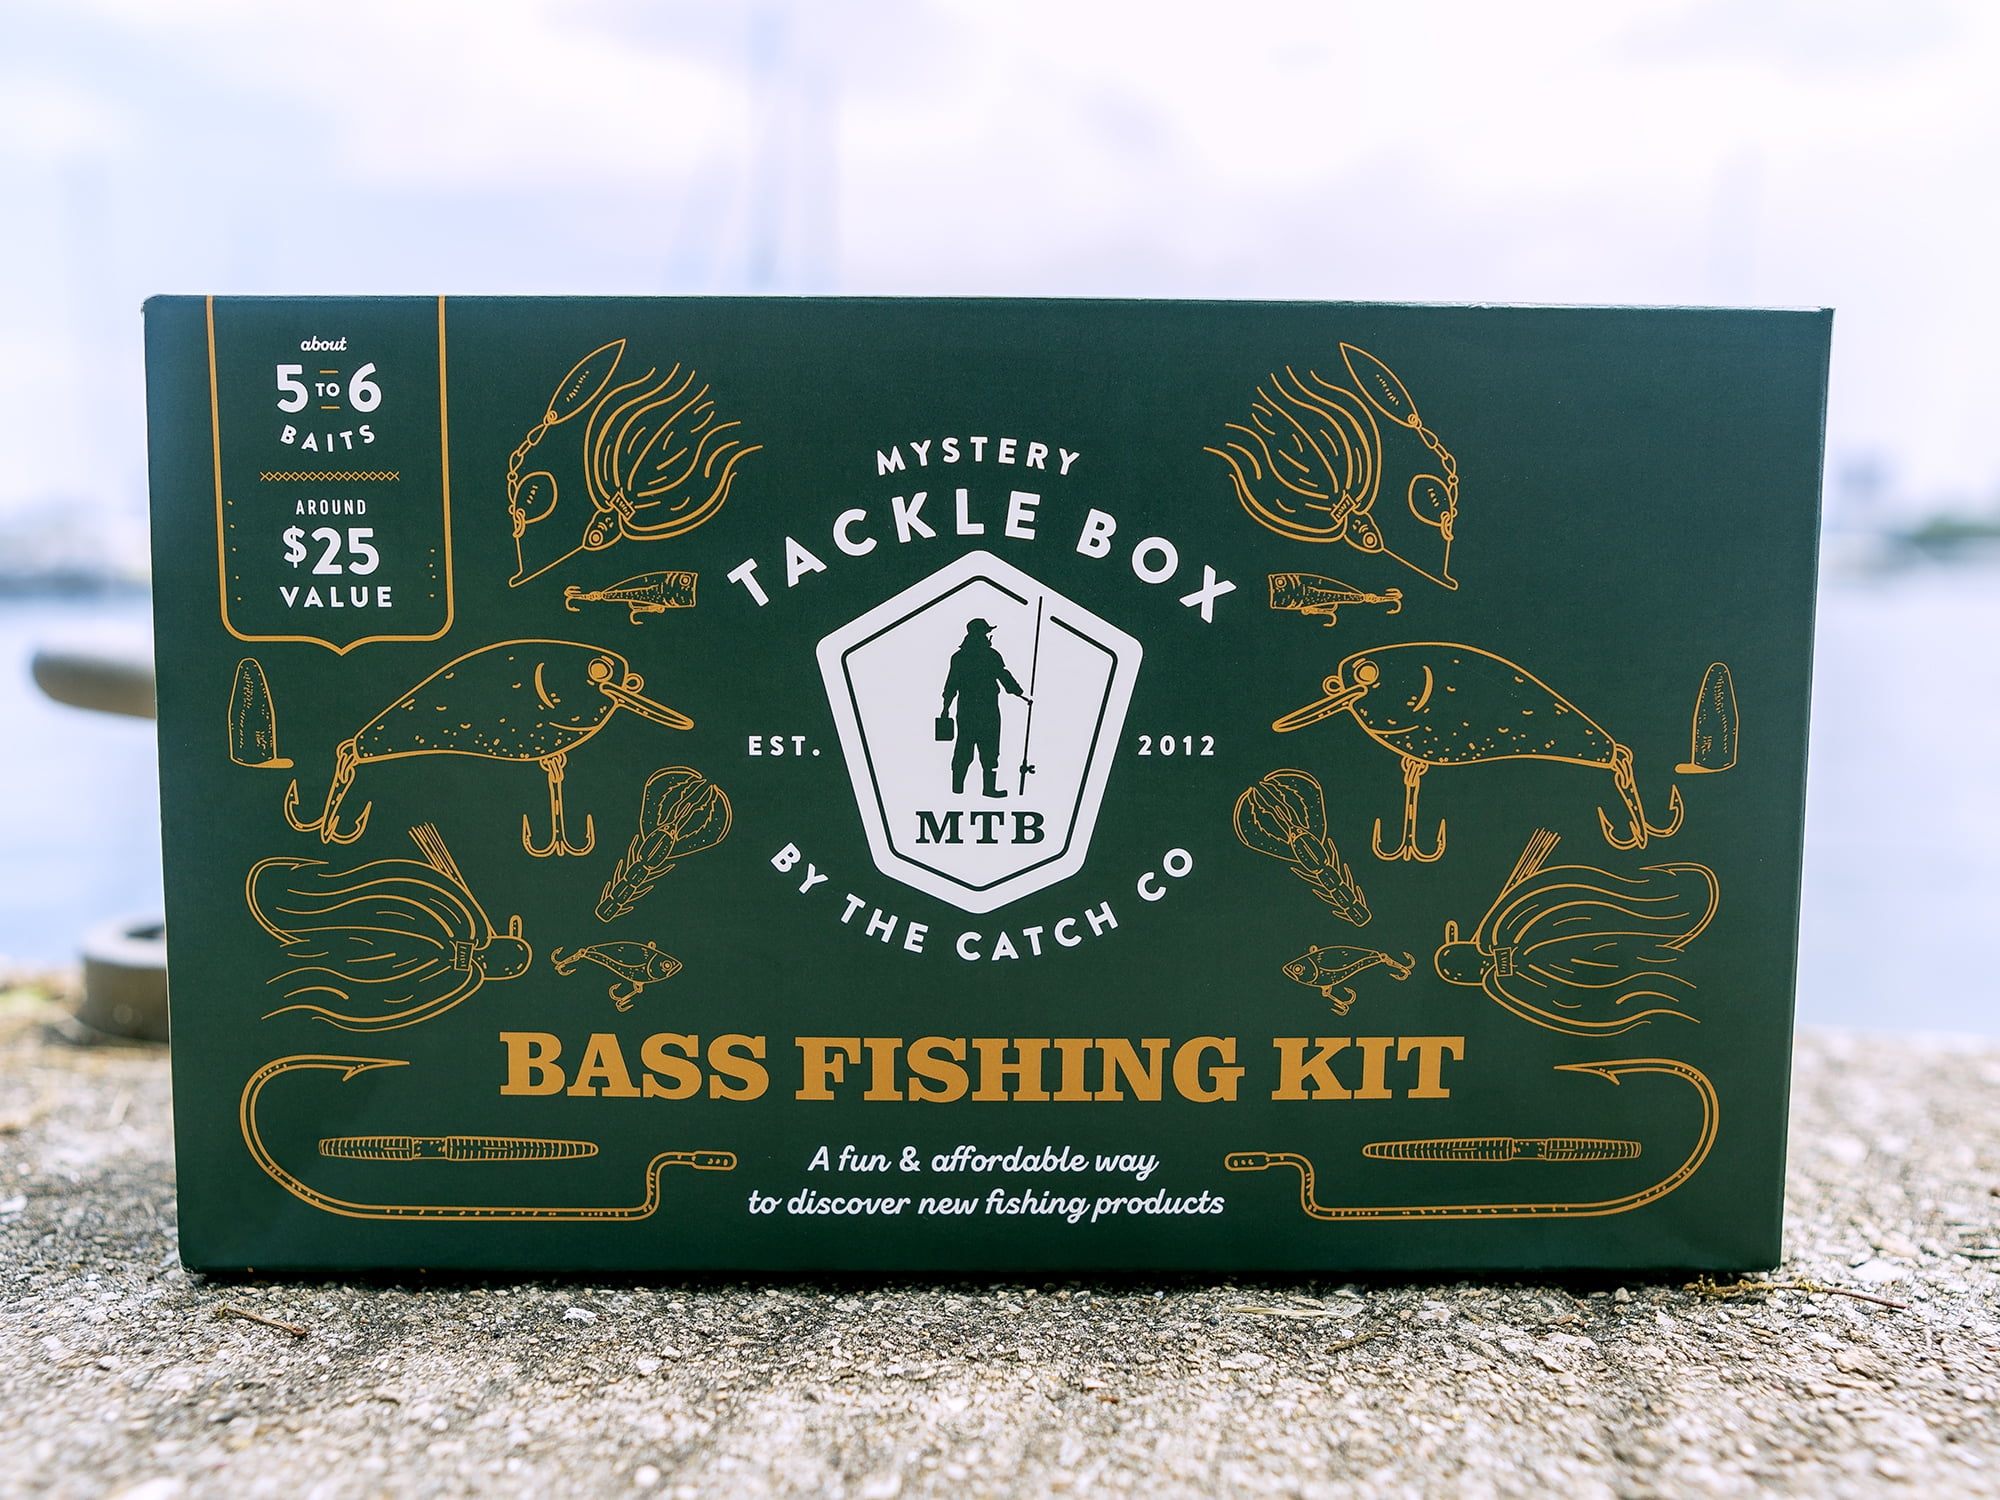 MYSTERY TACKLE BOX! MARCH 2023 WALLEYE! 